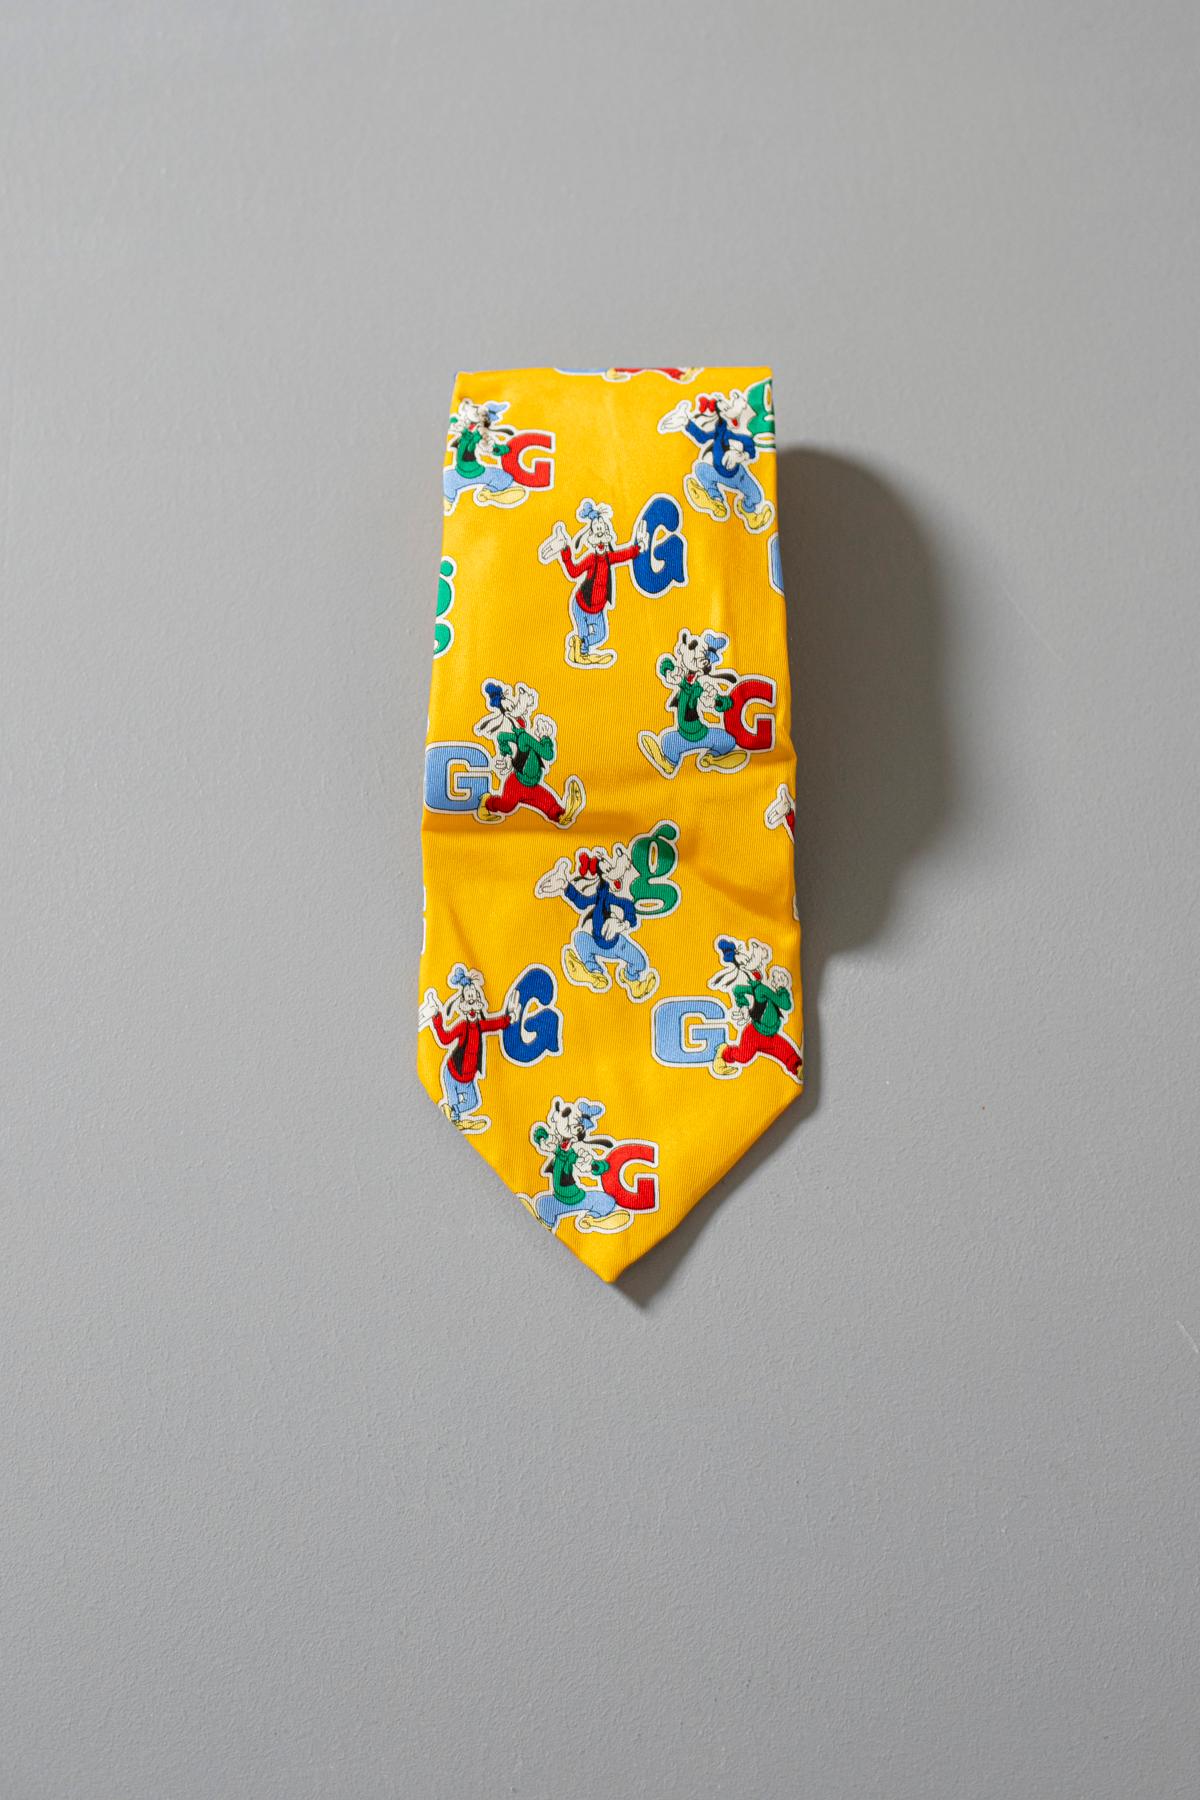 Cool vintage Walt Disney Iside tie, fresh and young this ideal for Pluto fans. It is made in 100% silk, which is the reason why it is smooth and of good quality. This beautiful and colourful with its bright yellow color it is perfect to wear with a